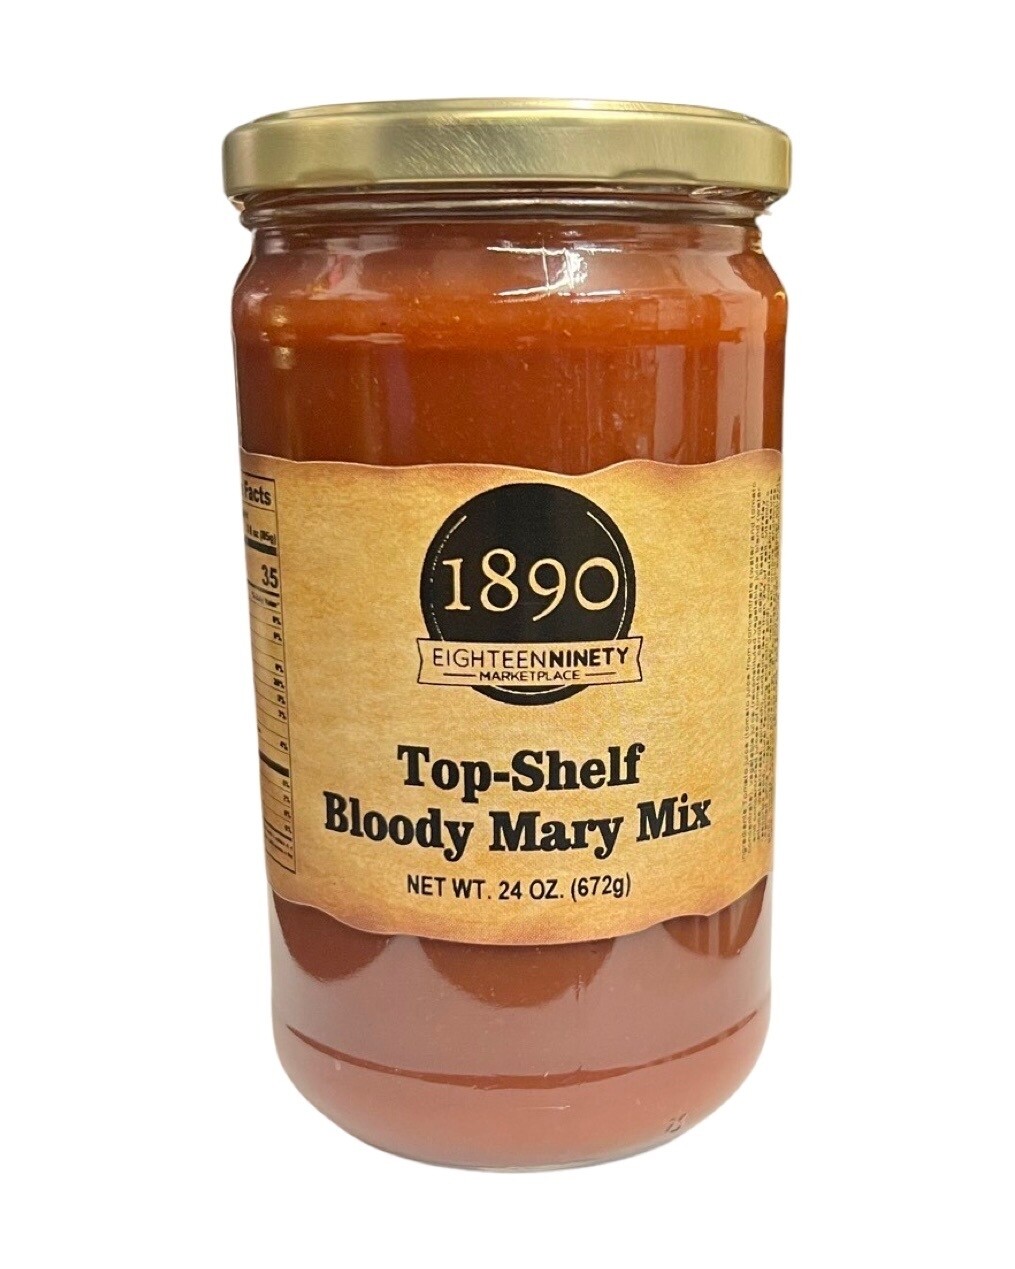 Top-Shelf Bloody Mary Mix